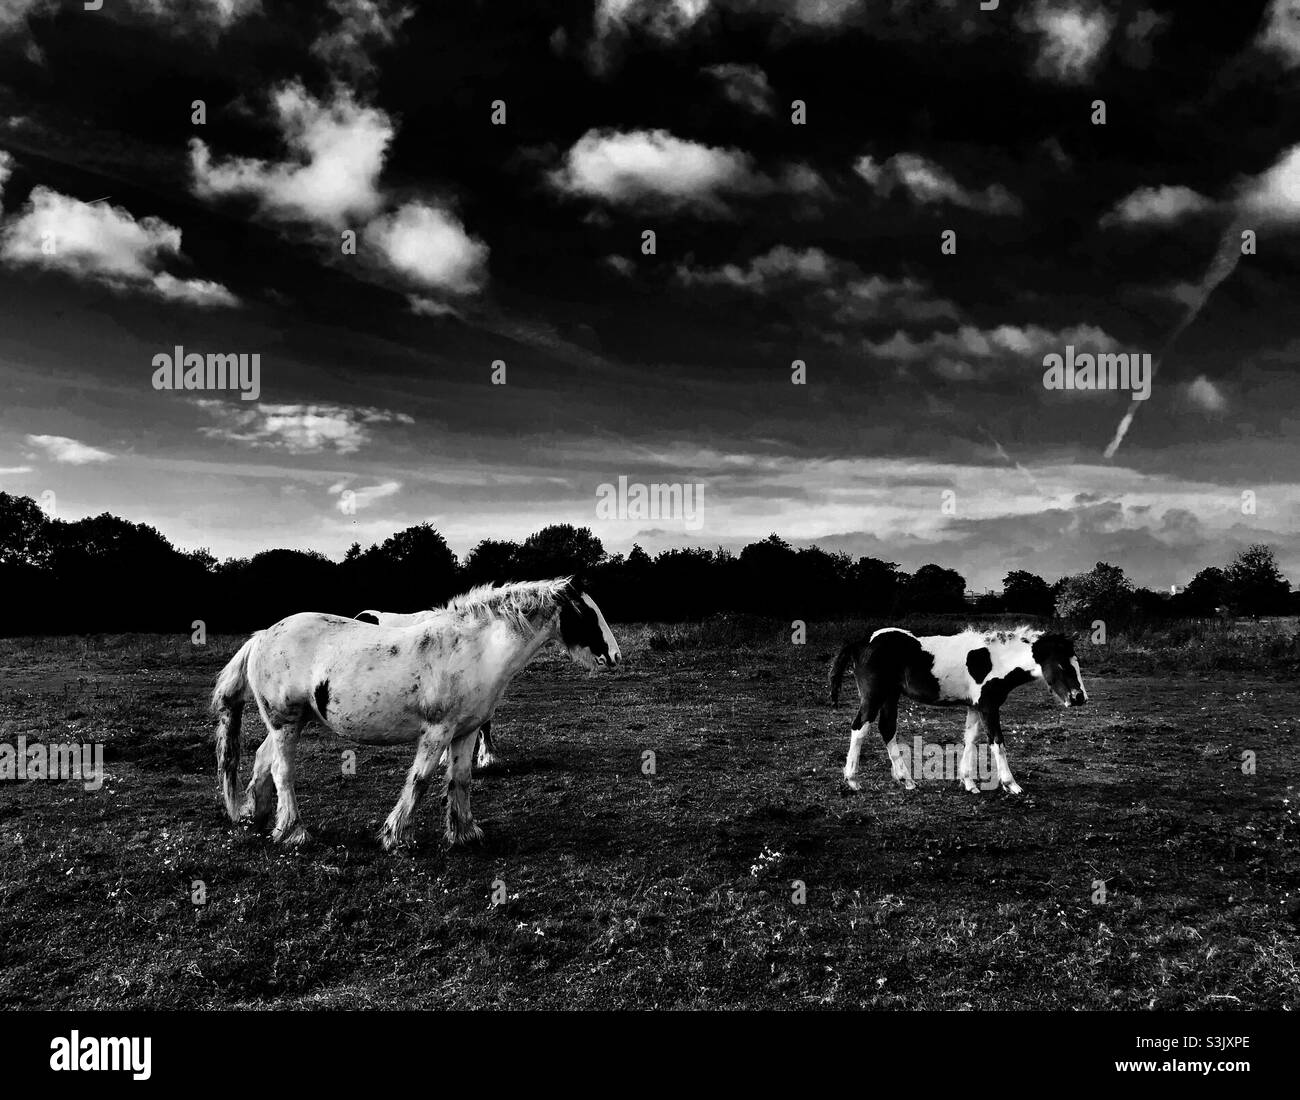 Dramatic monochrome image of wild horses grazing in the field Stock Photo